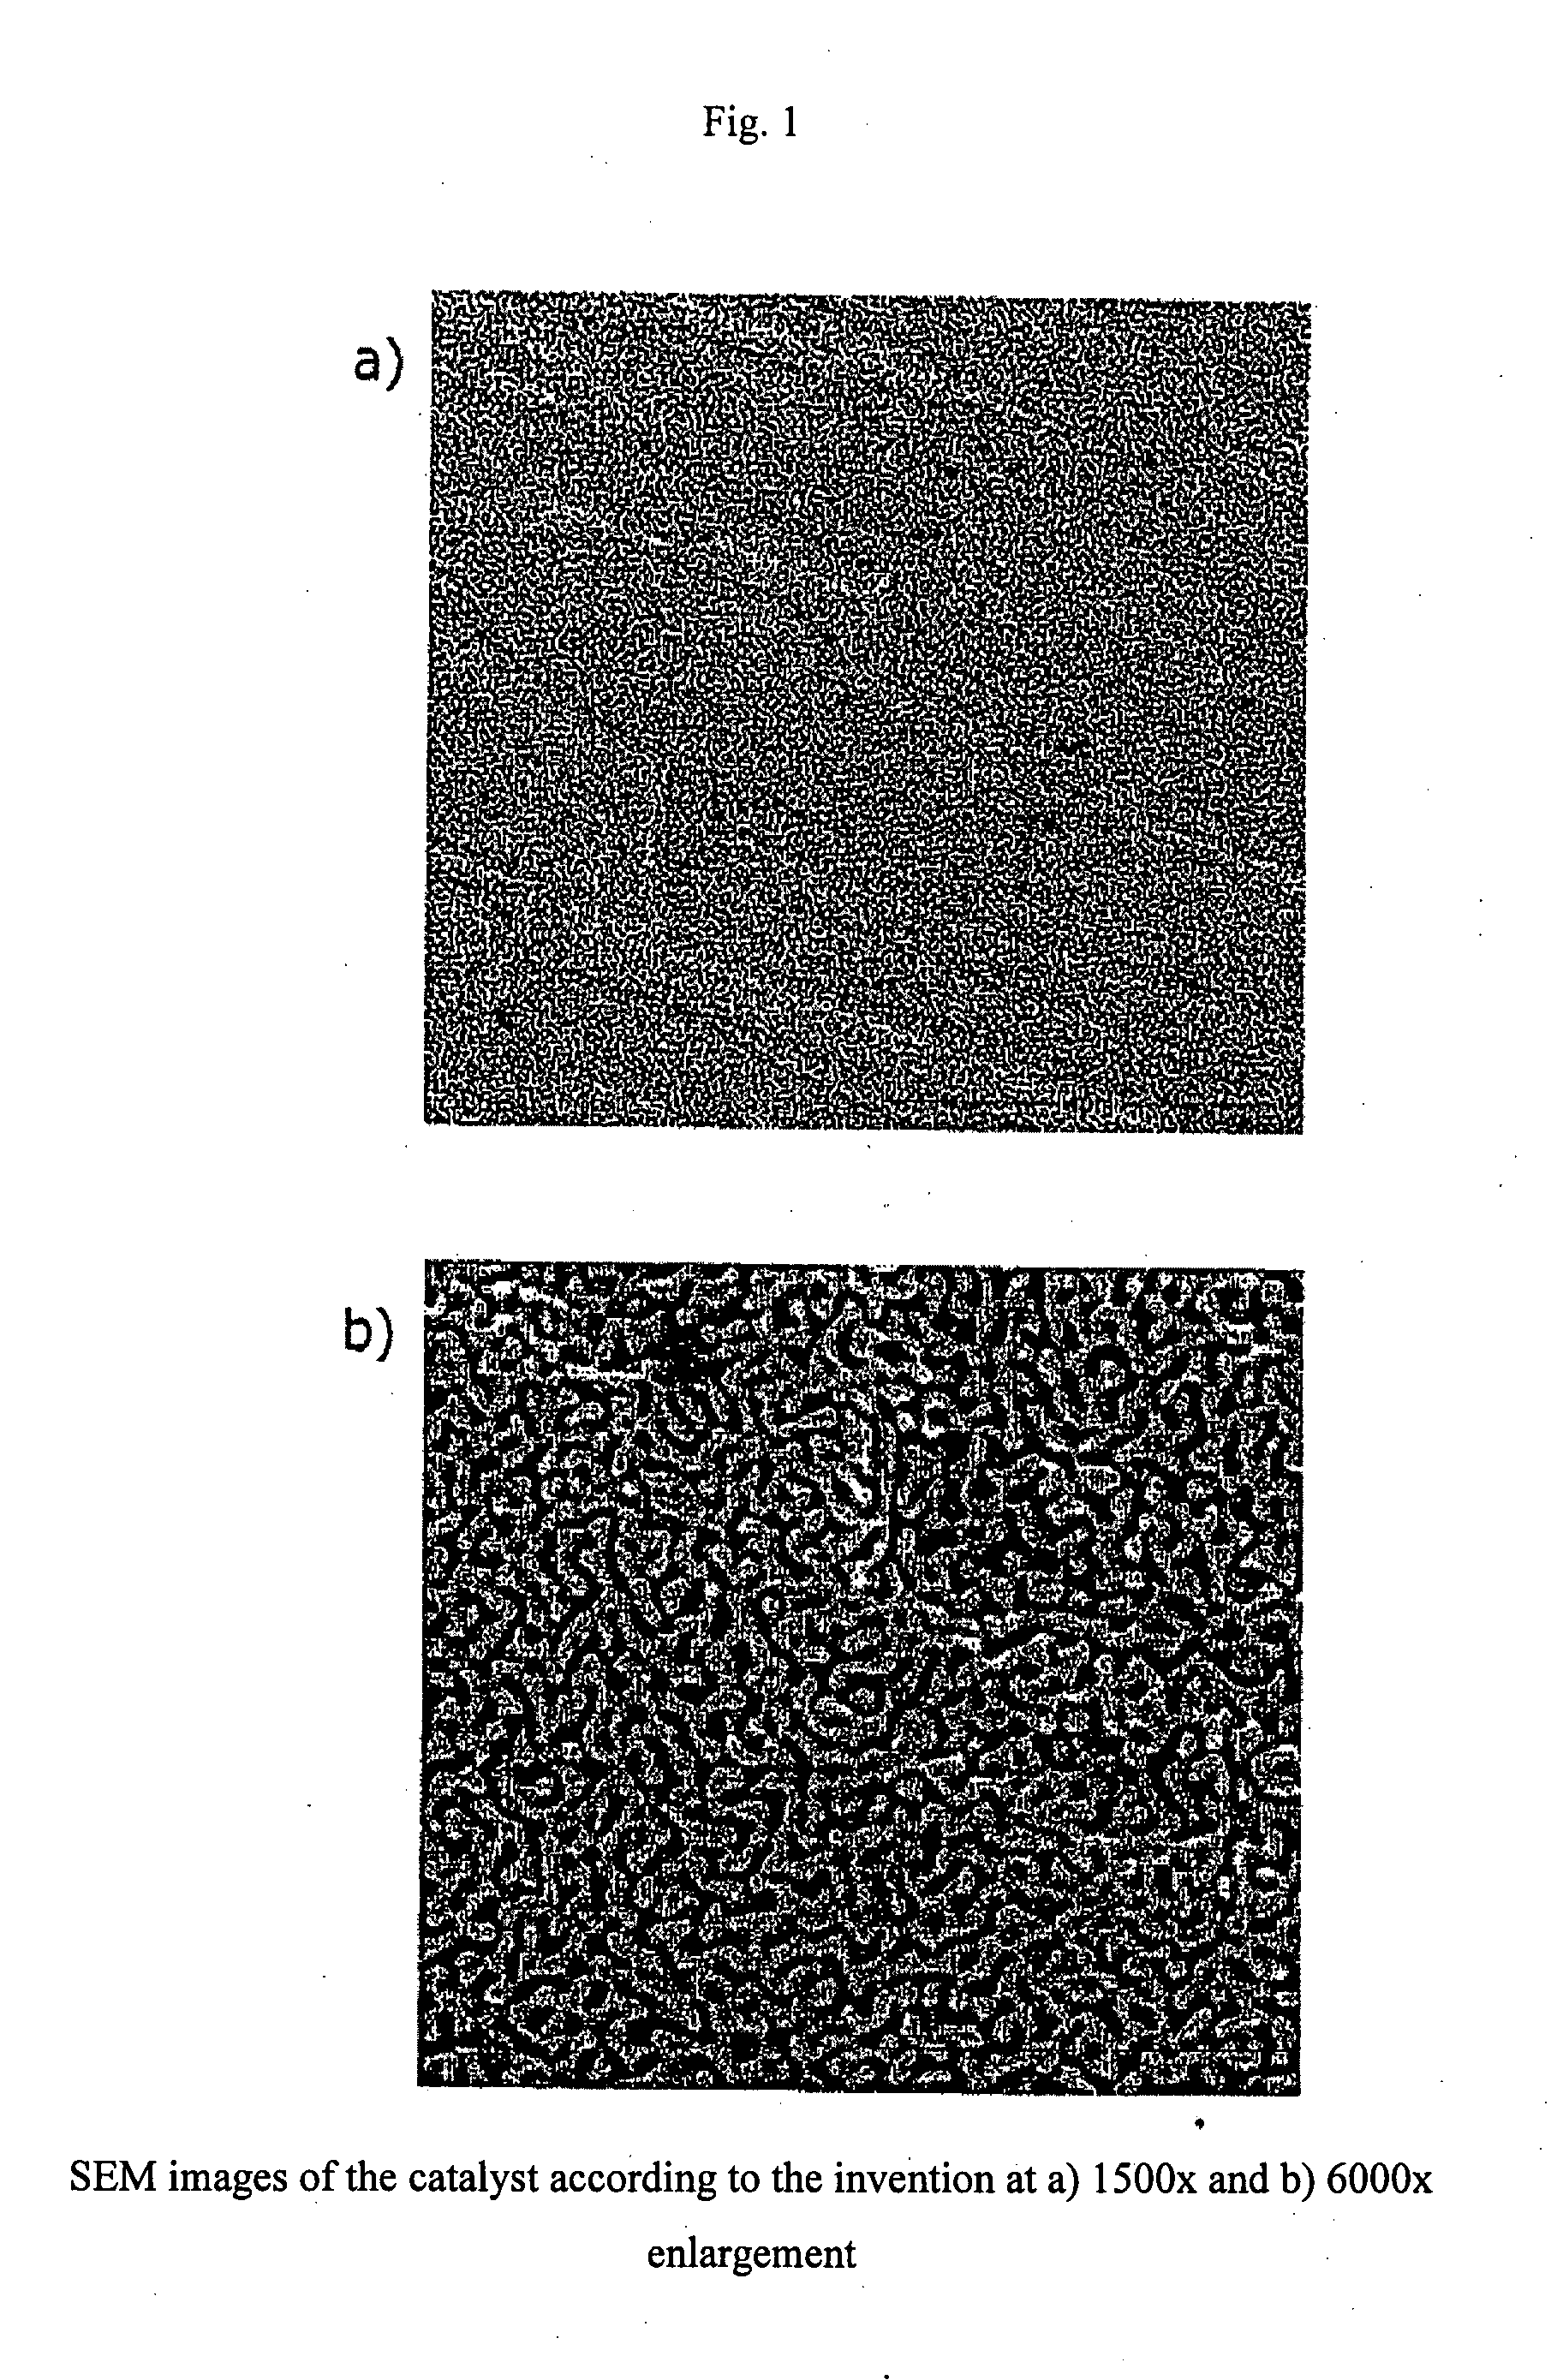 Gold-containing catalyst with porous structure